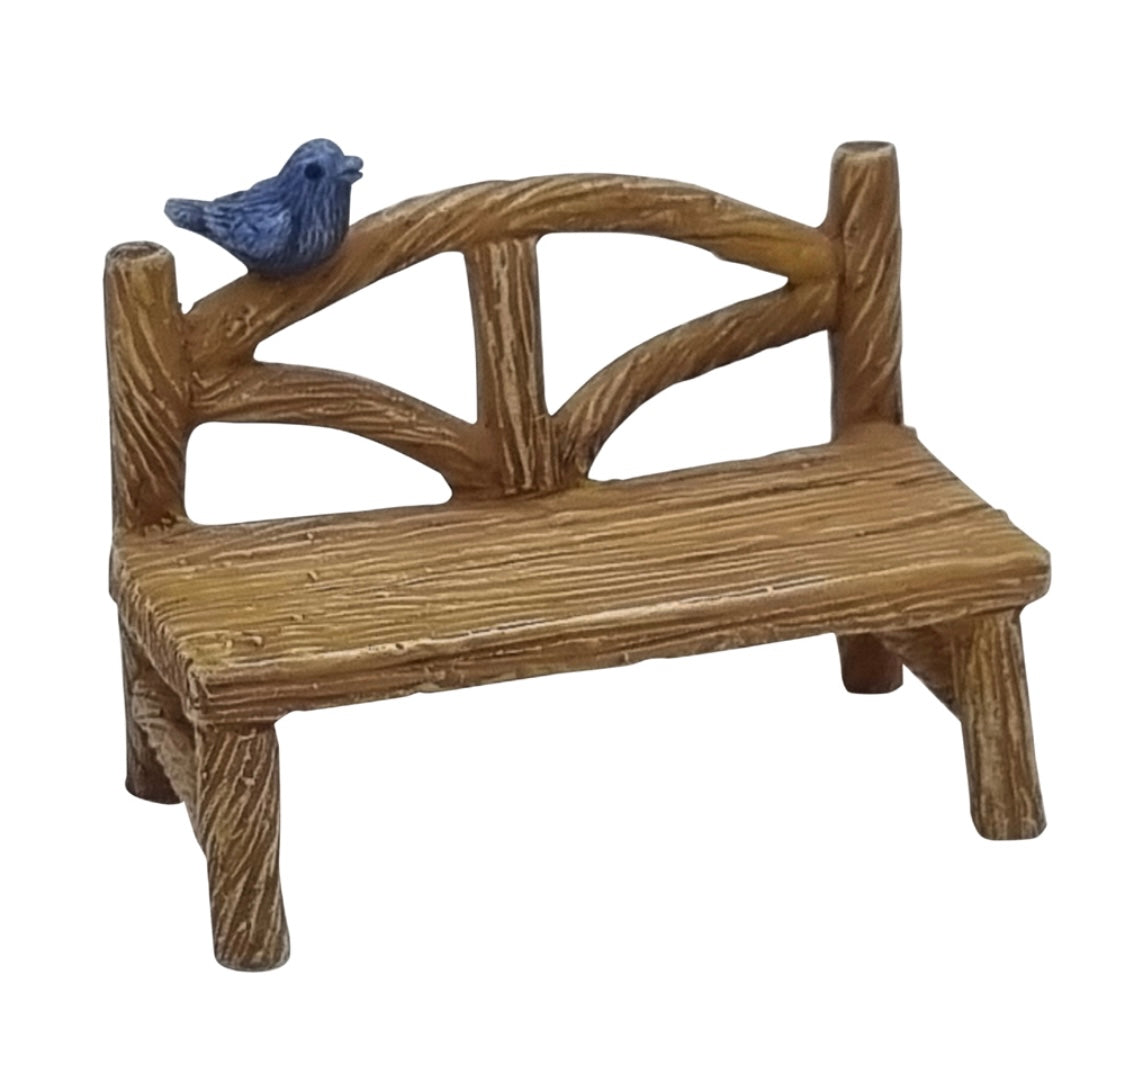 Wooden Bench with Bird